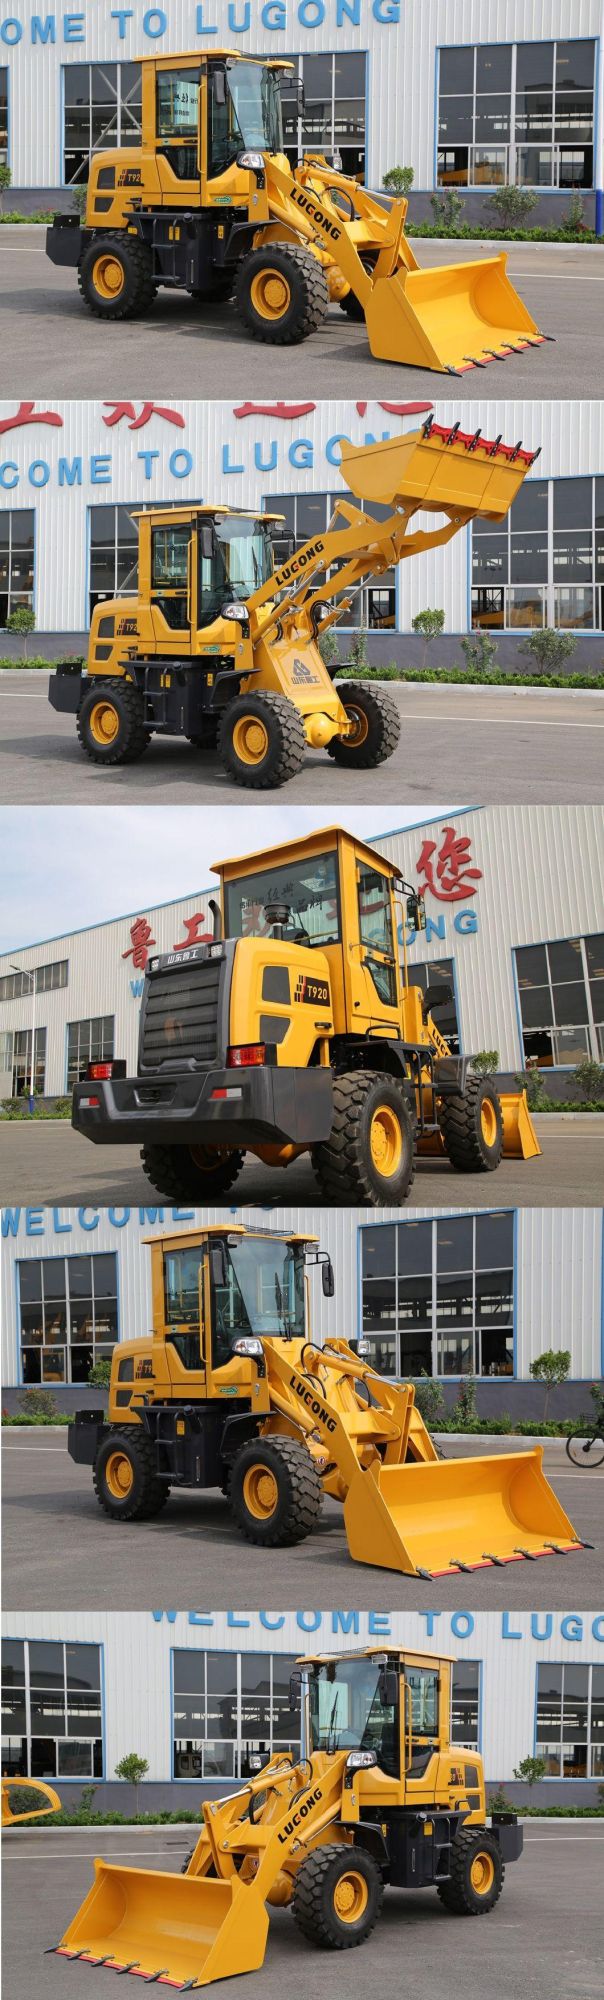 Sx Mini Model Lugong Brand Compact Good Condition High Performance Wheel Loader